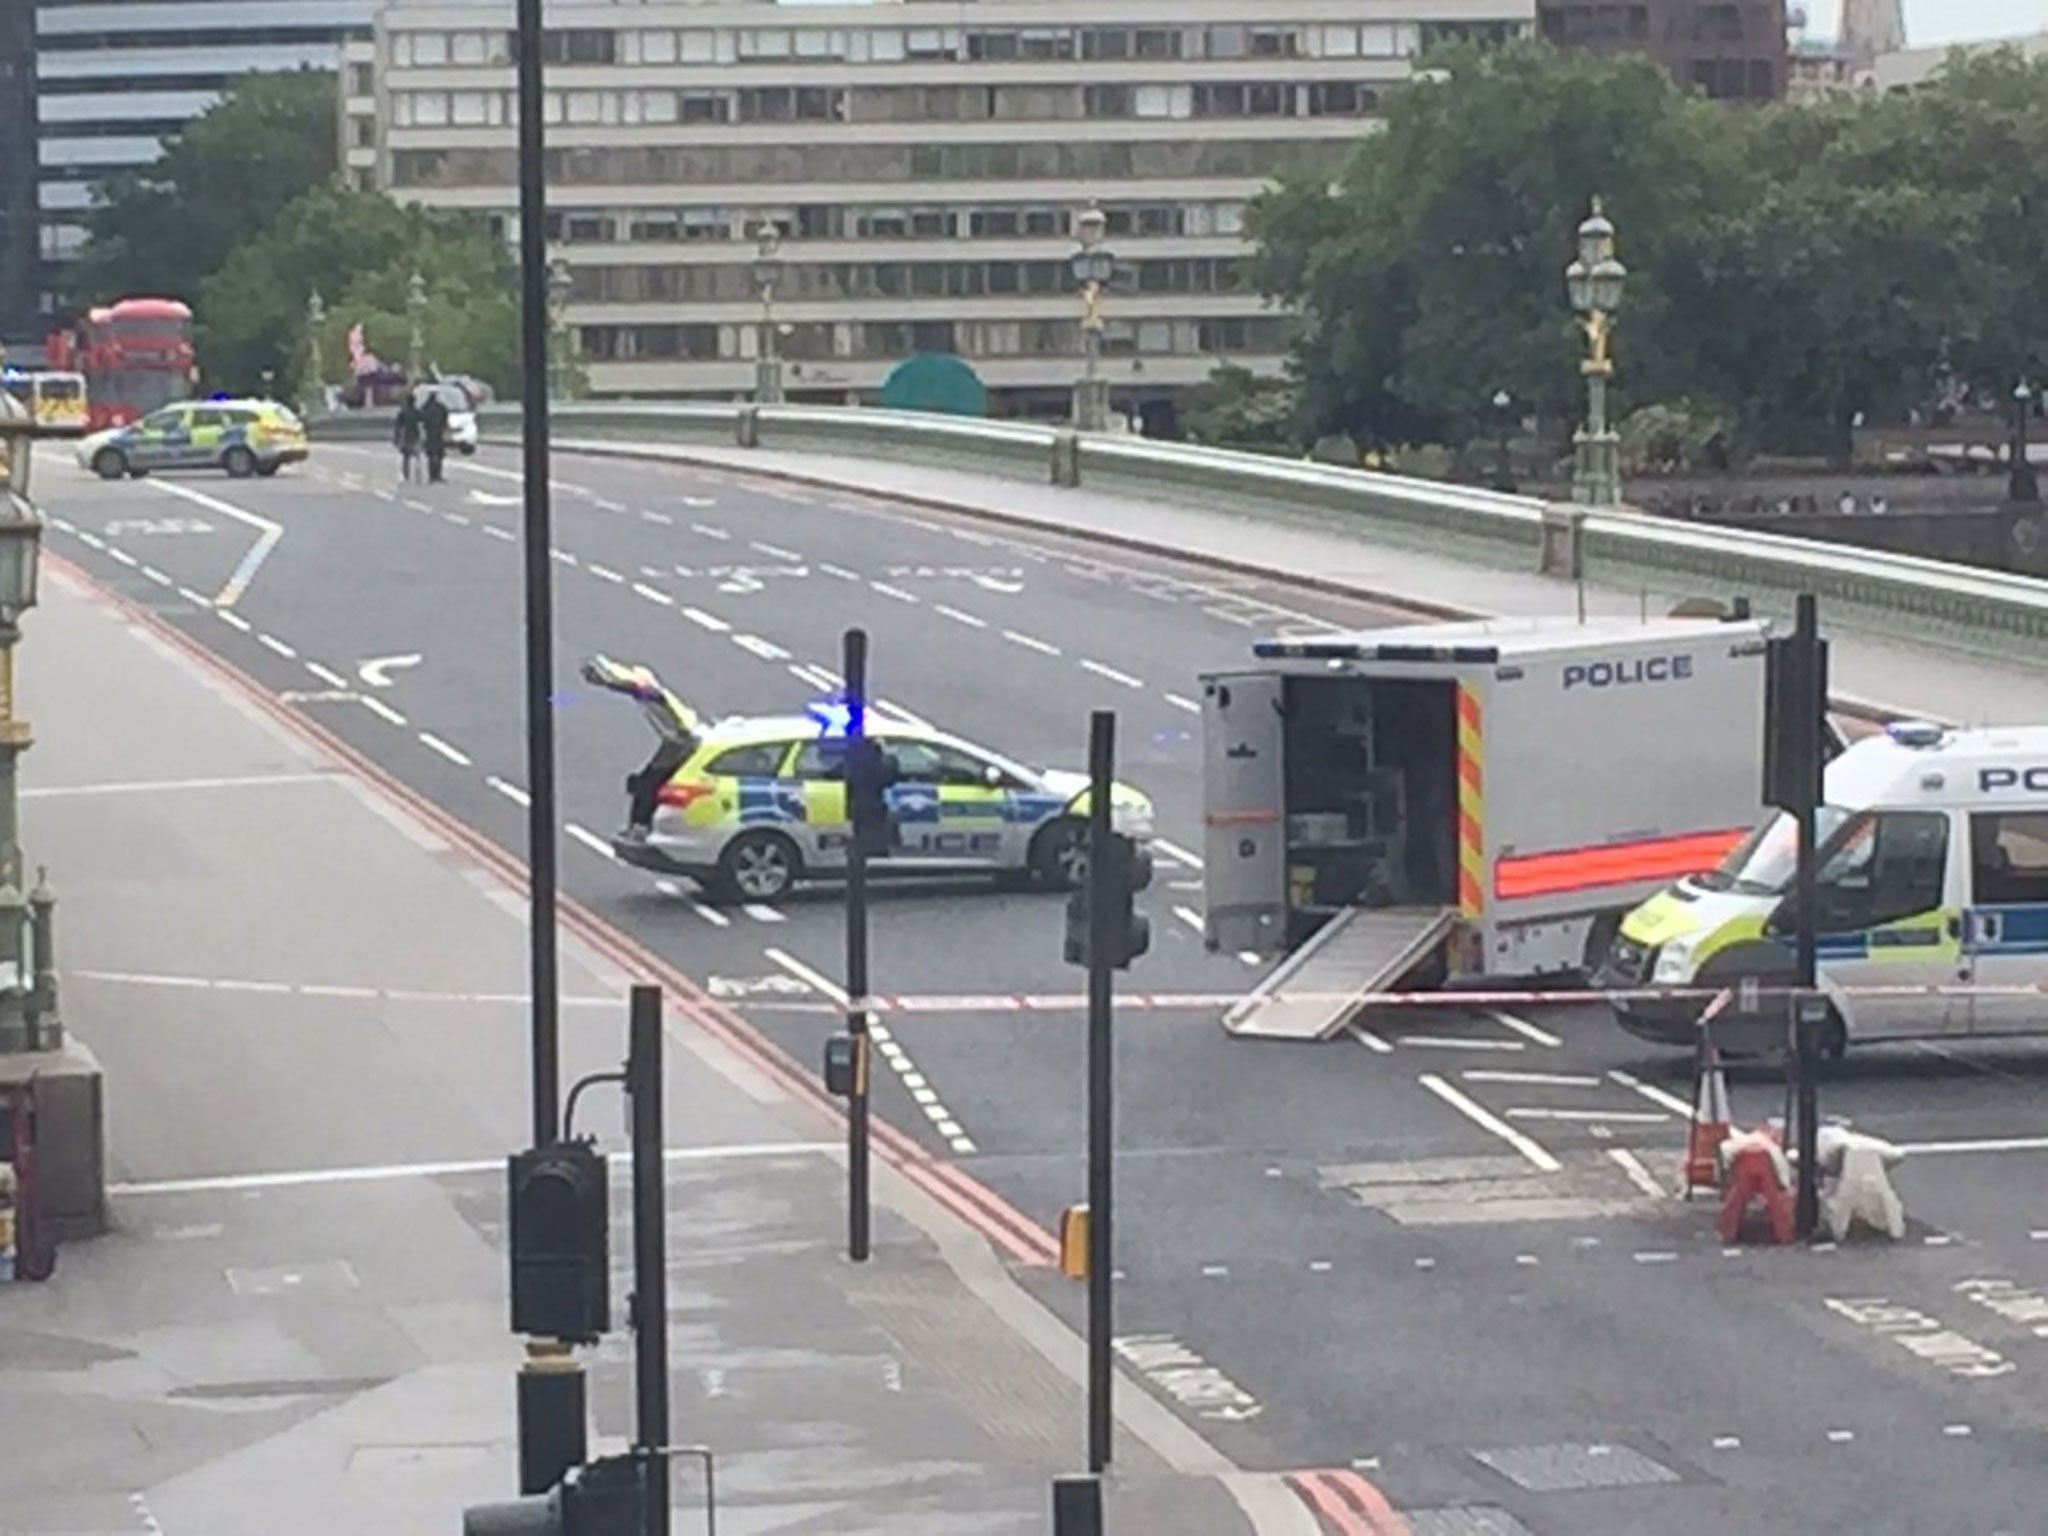 Police escorting the driver back to his car after it sparked a security alert on Westminster Bridge